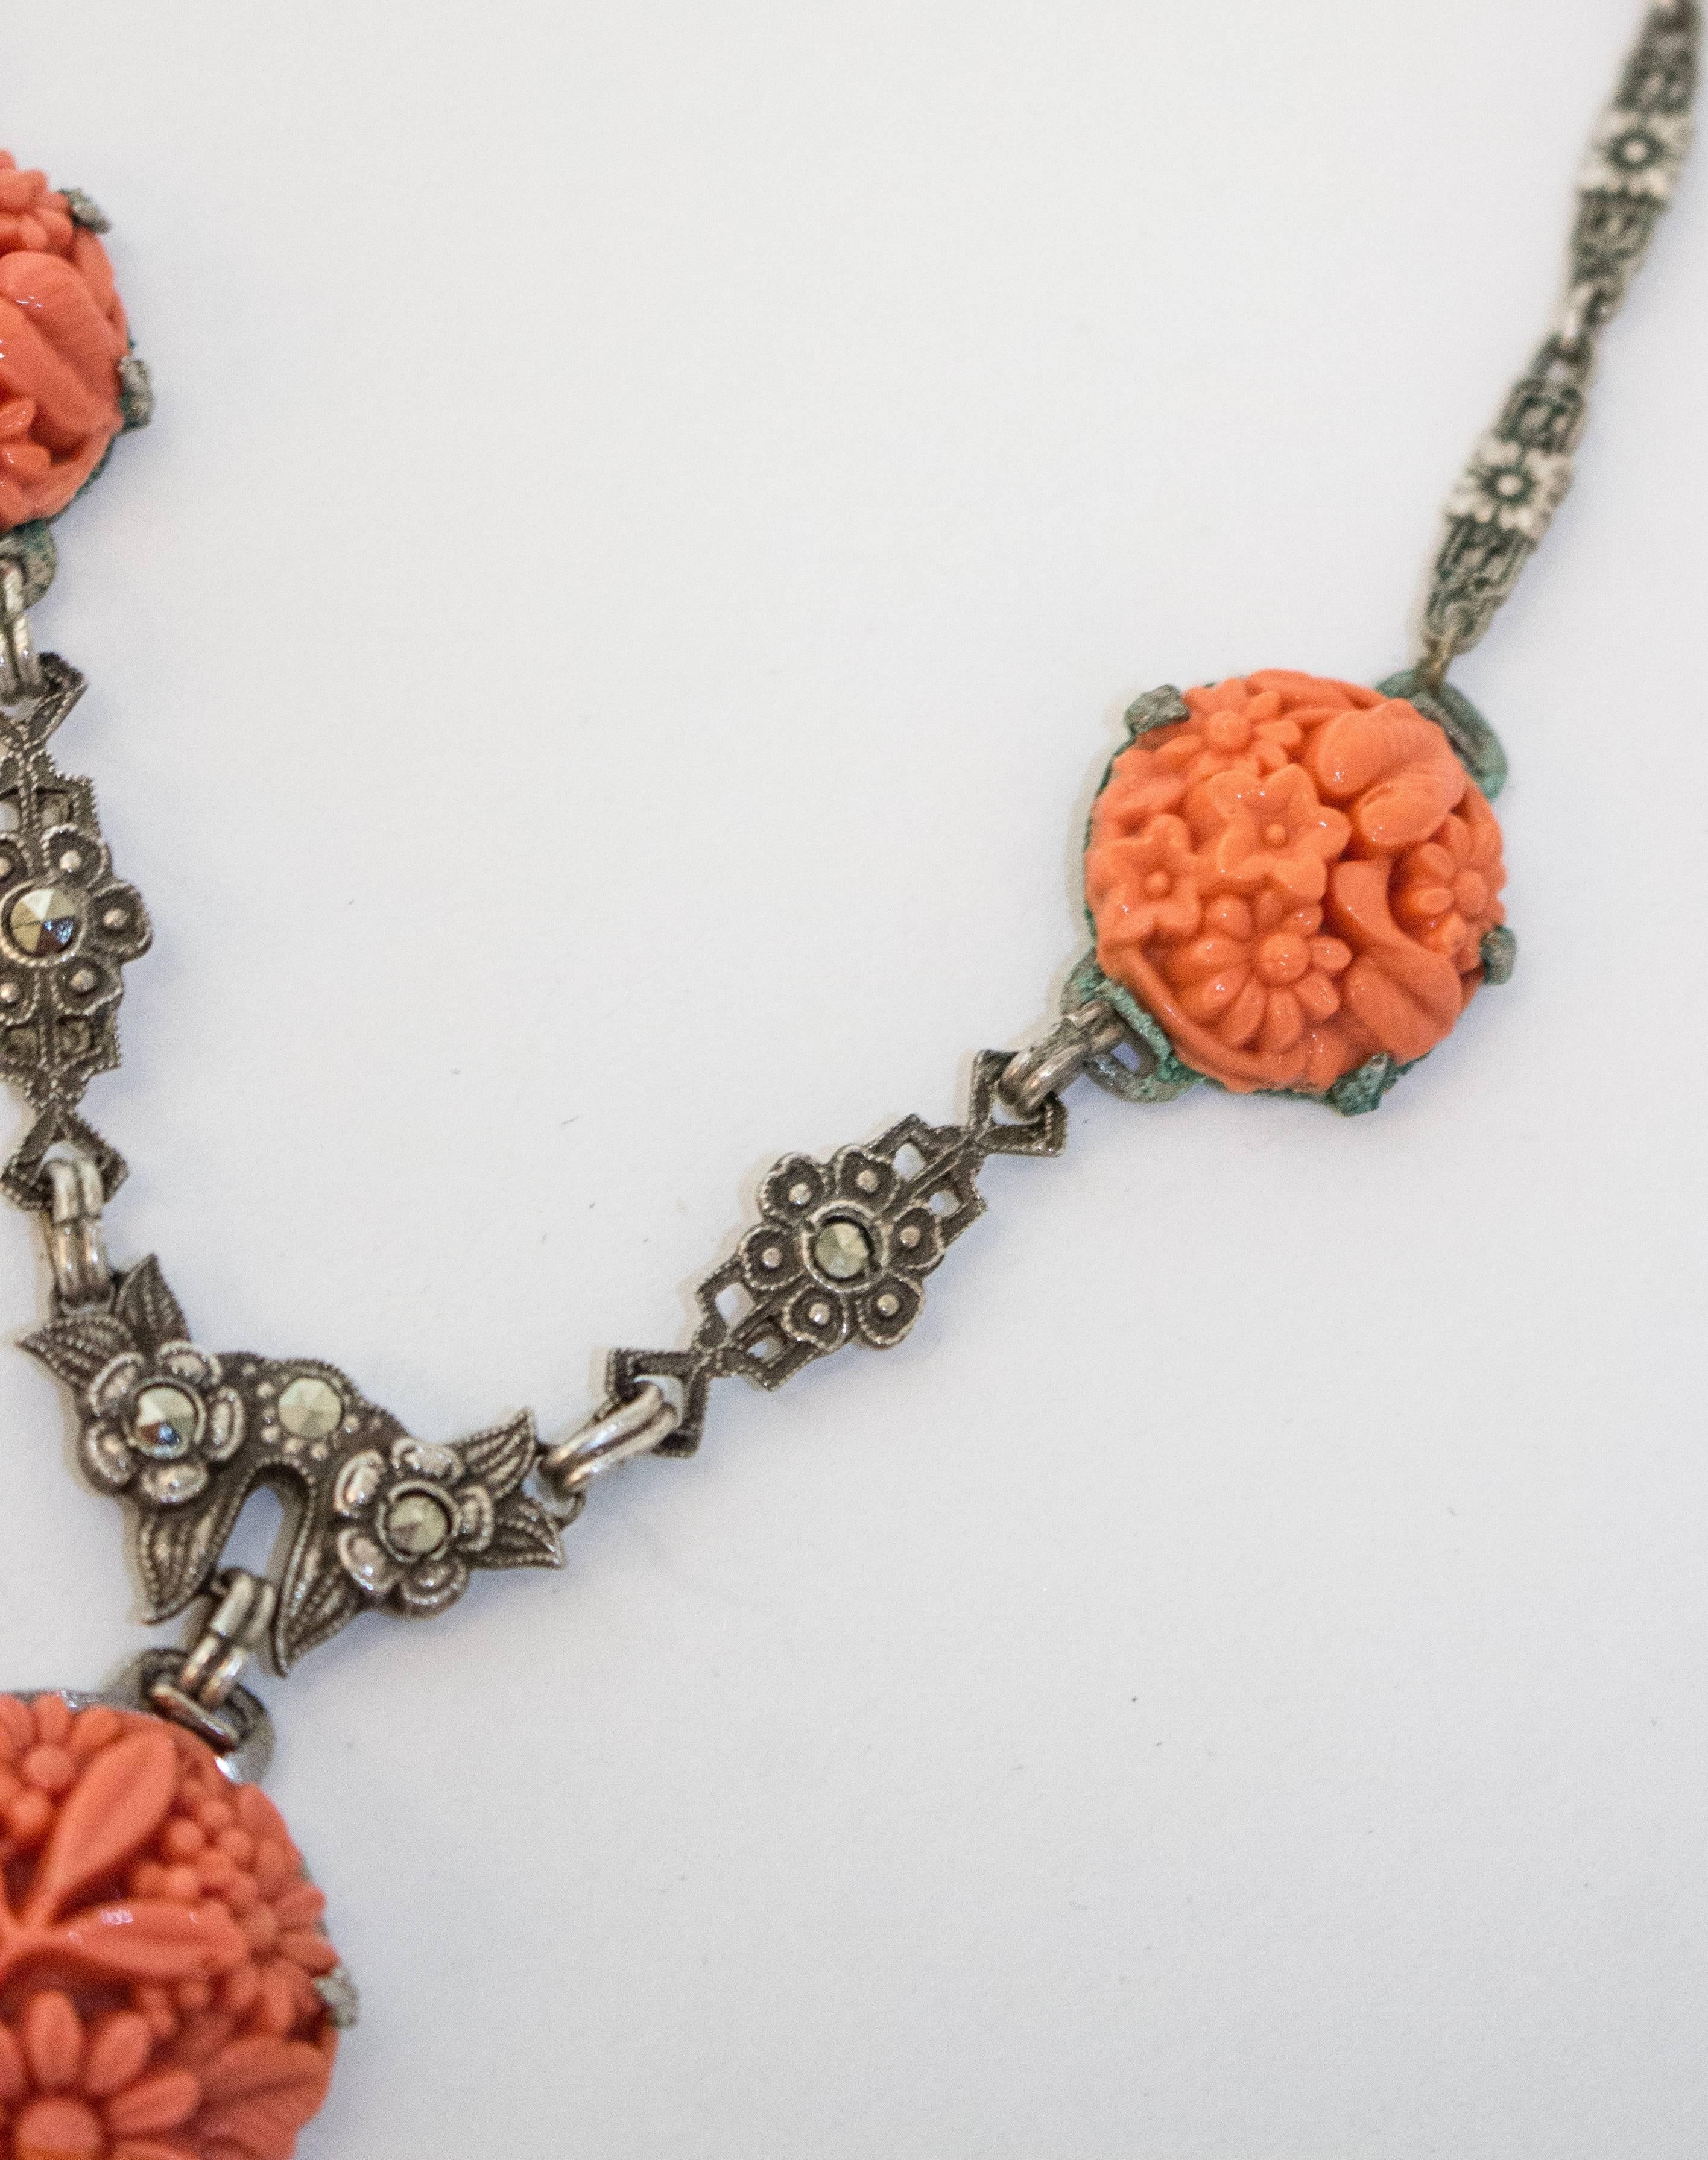 1930s Orange and Silver Necklace. Sterling silver hardware set with marcasites and orange floral motif Peking glass